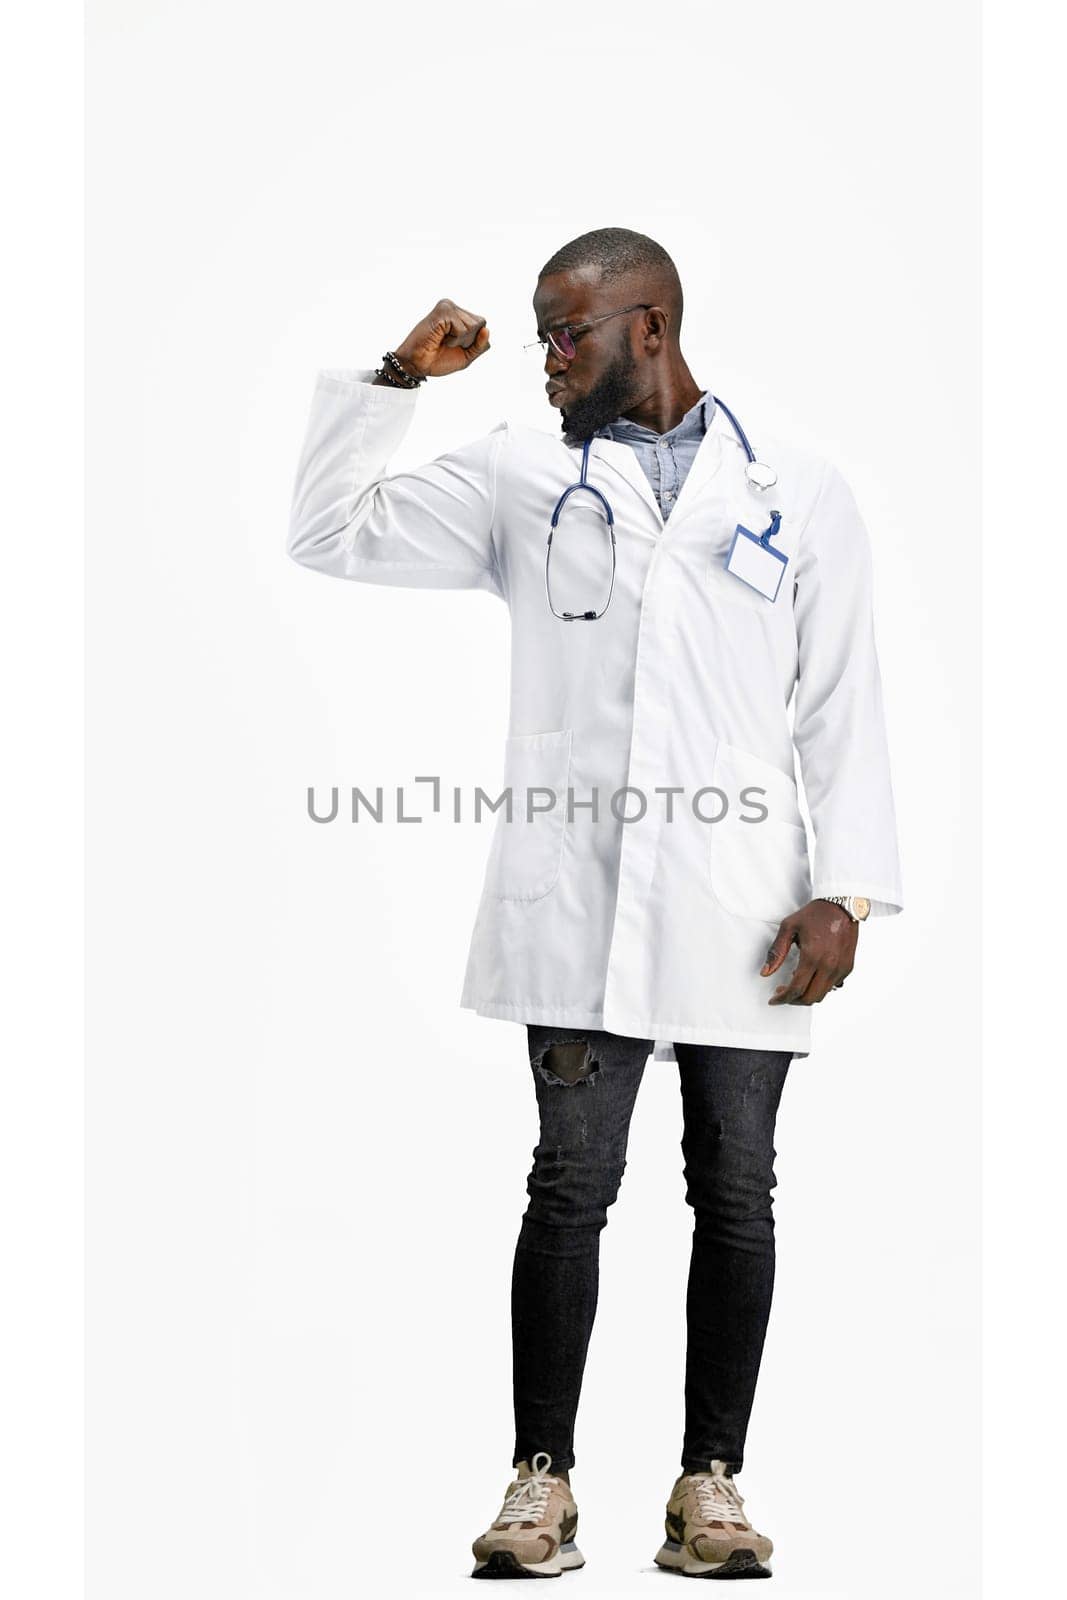 The doctor, in full height, on a white background, shows strength.